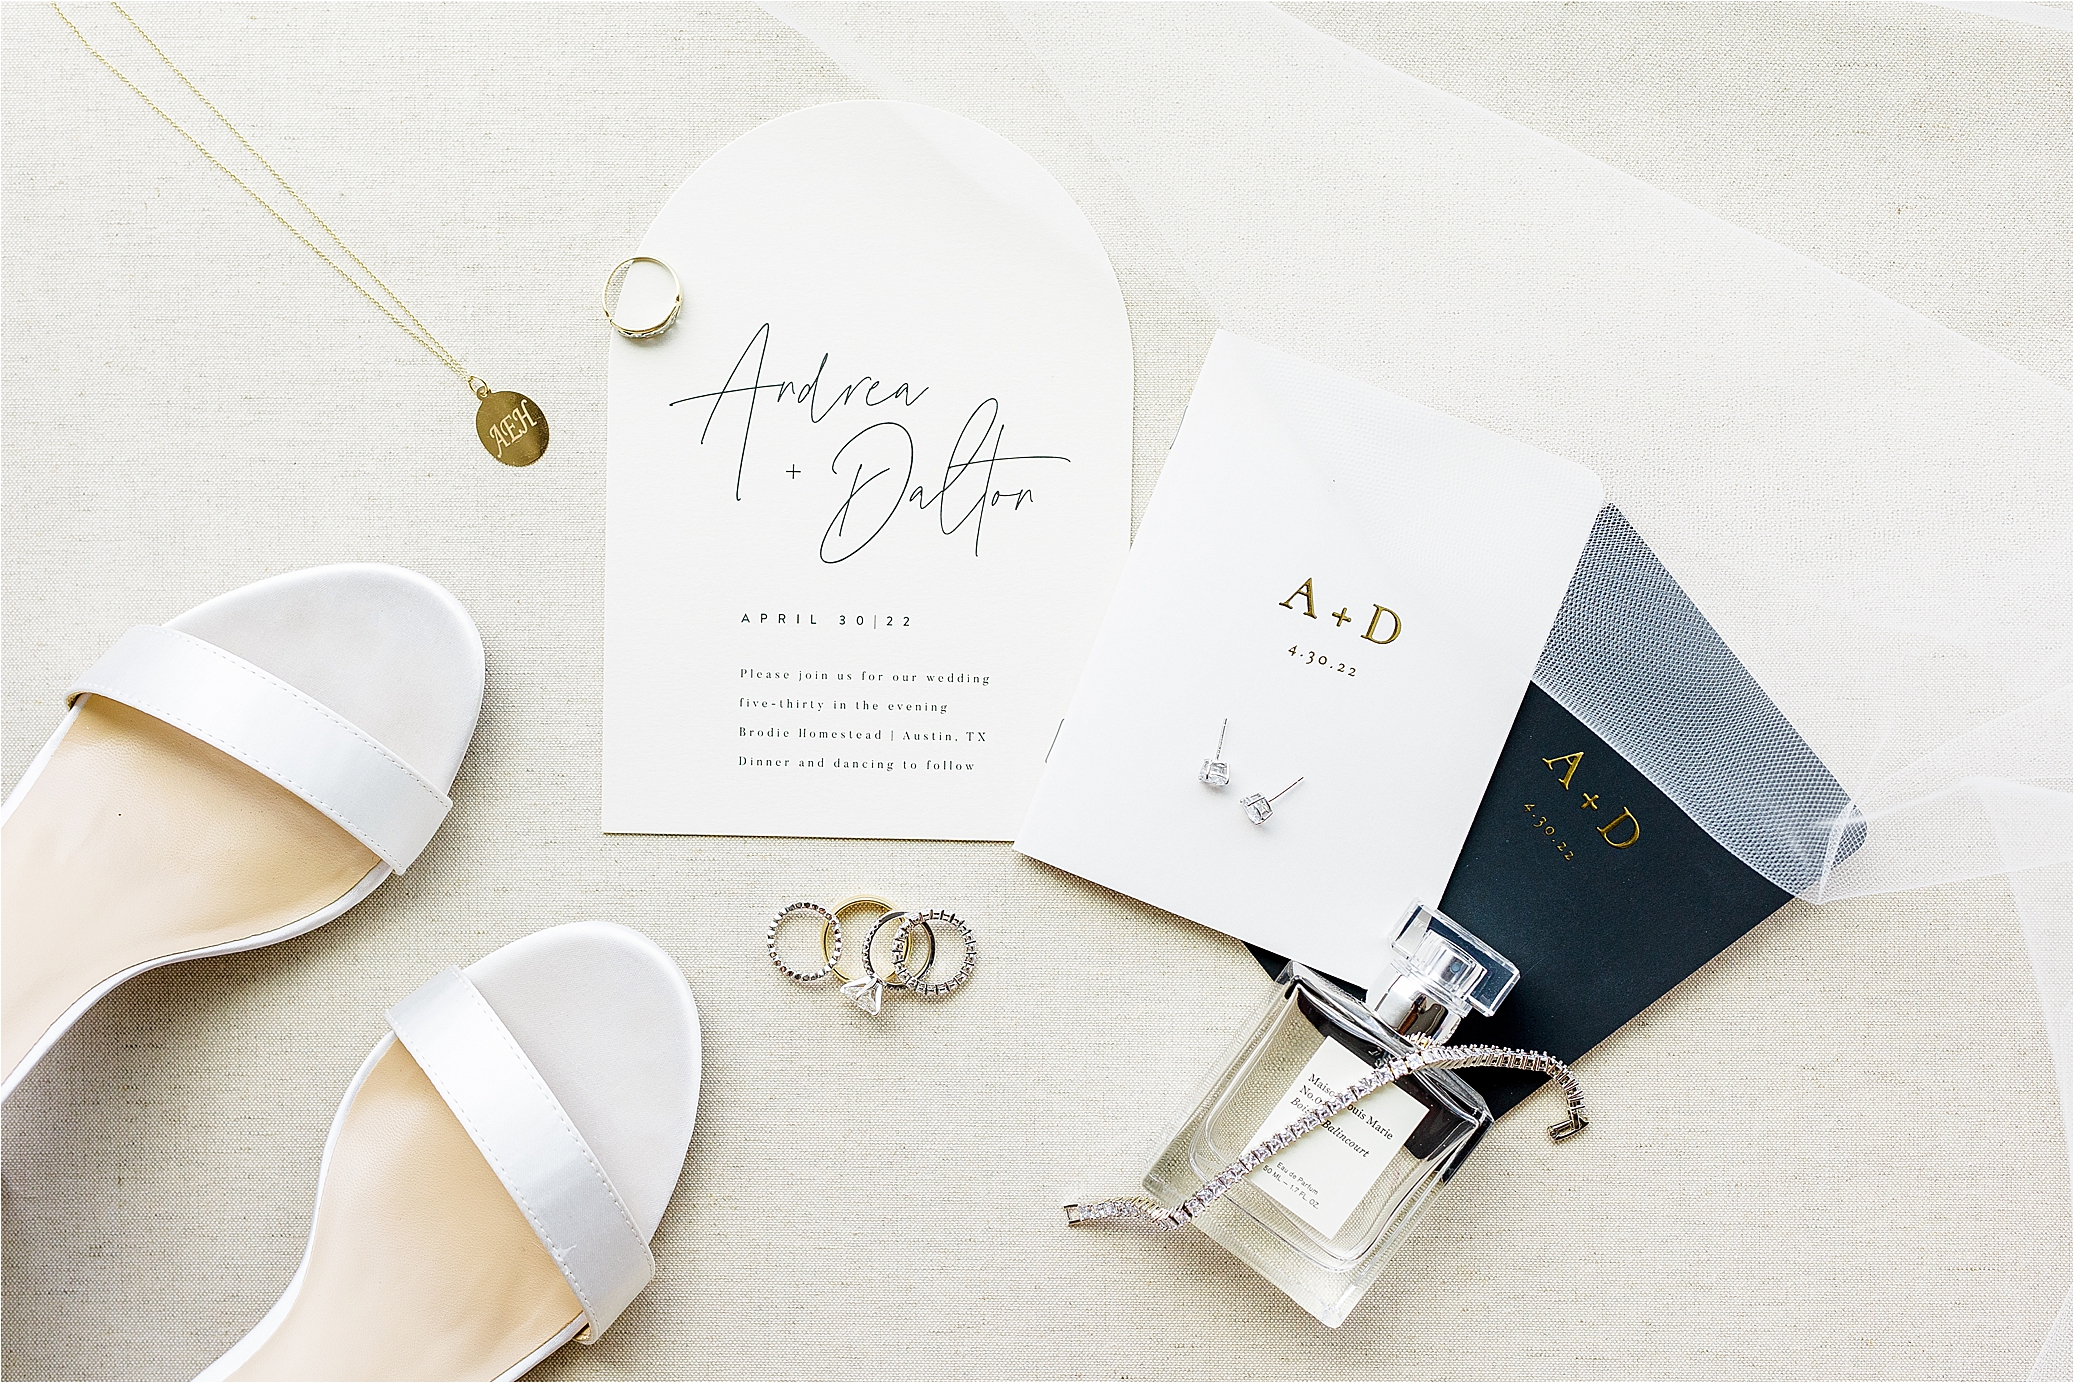 A photo of black and white bridal details, perfume, white shoes, gold necklace and an invitation with script type and a veil in corner for an Austin, Texas Wedding